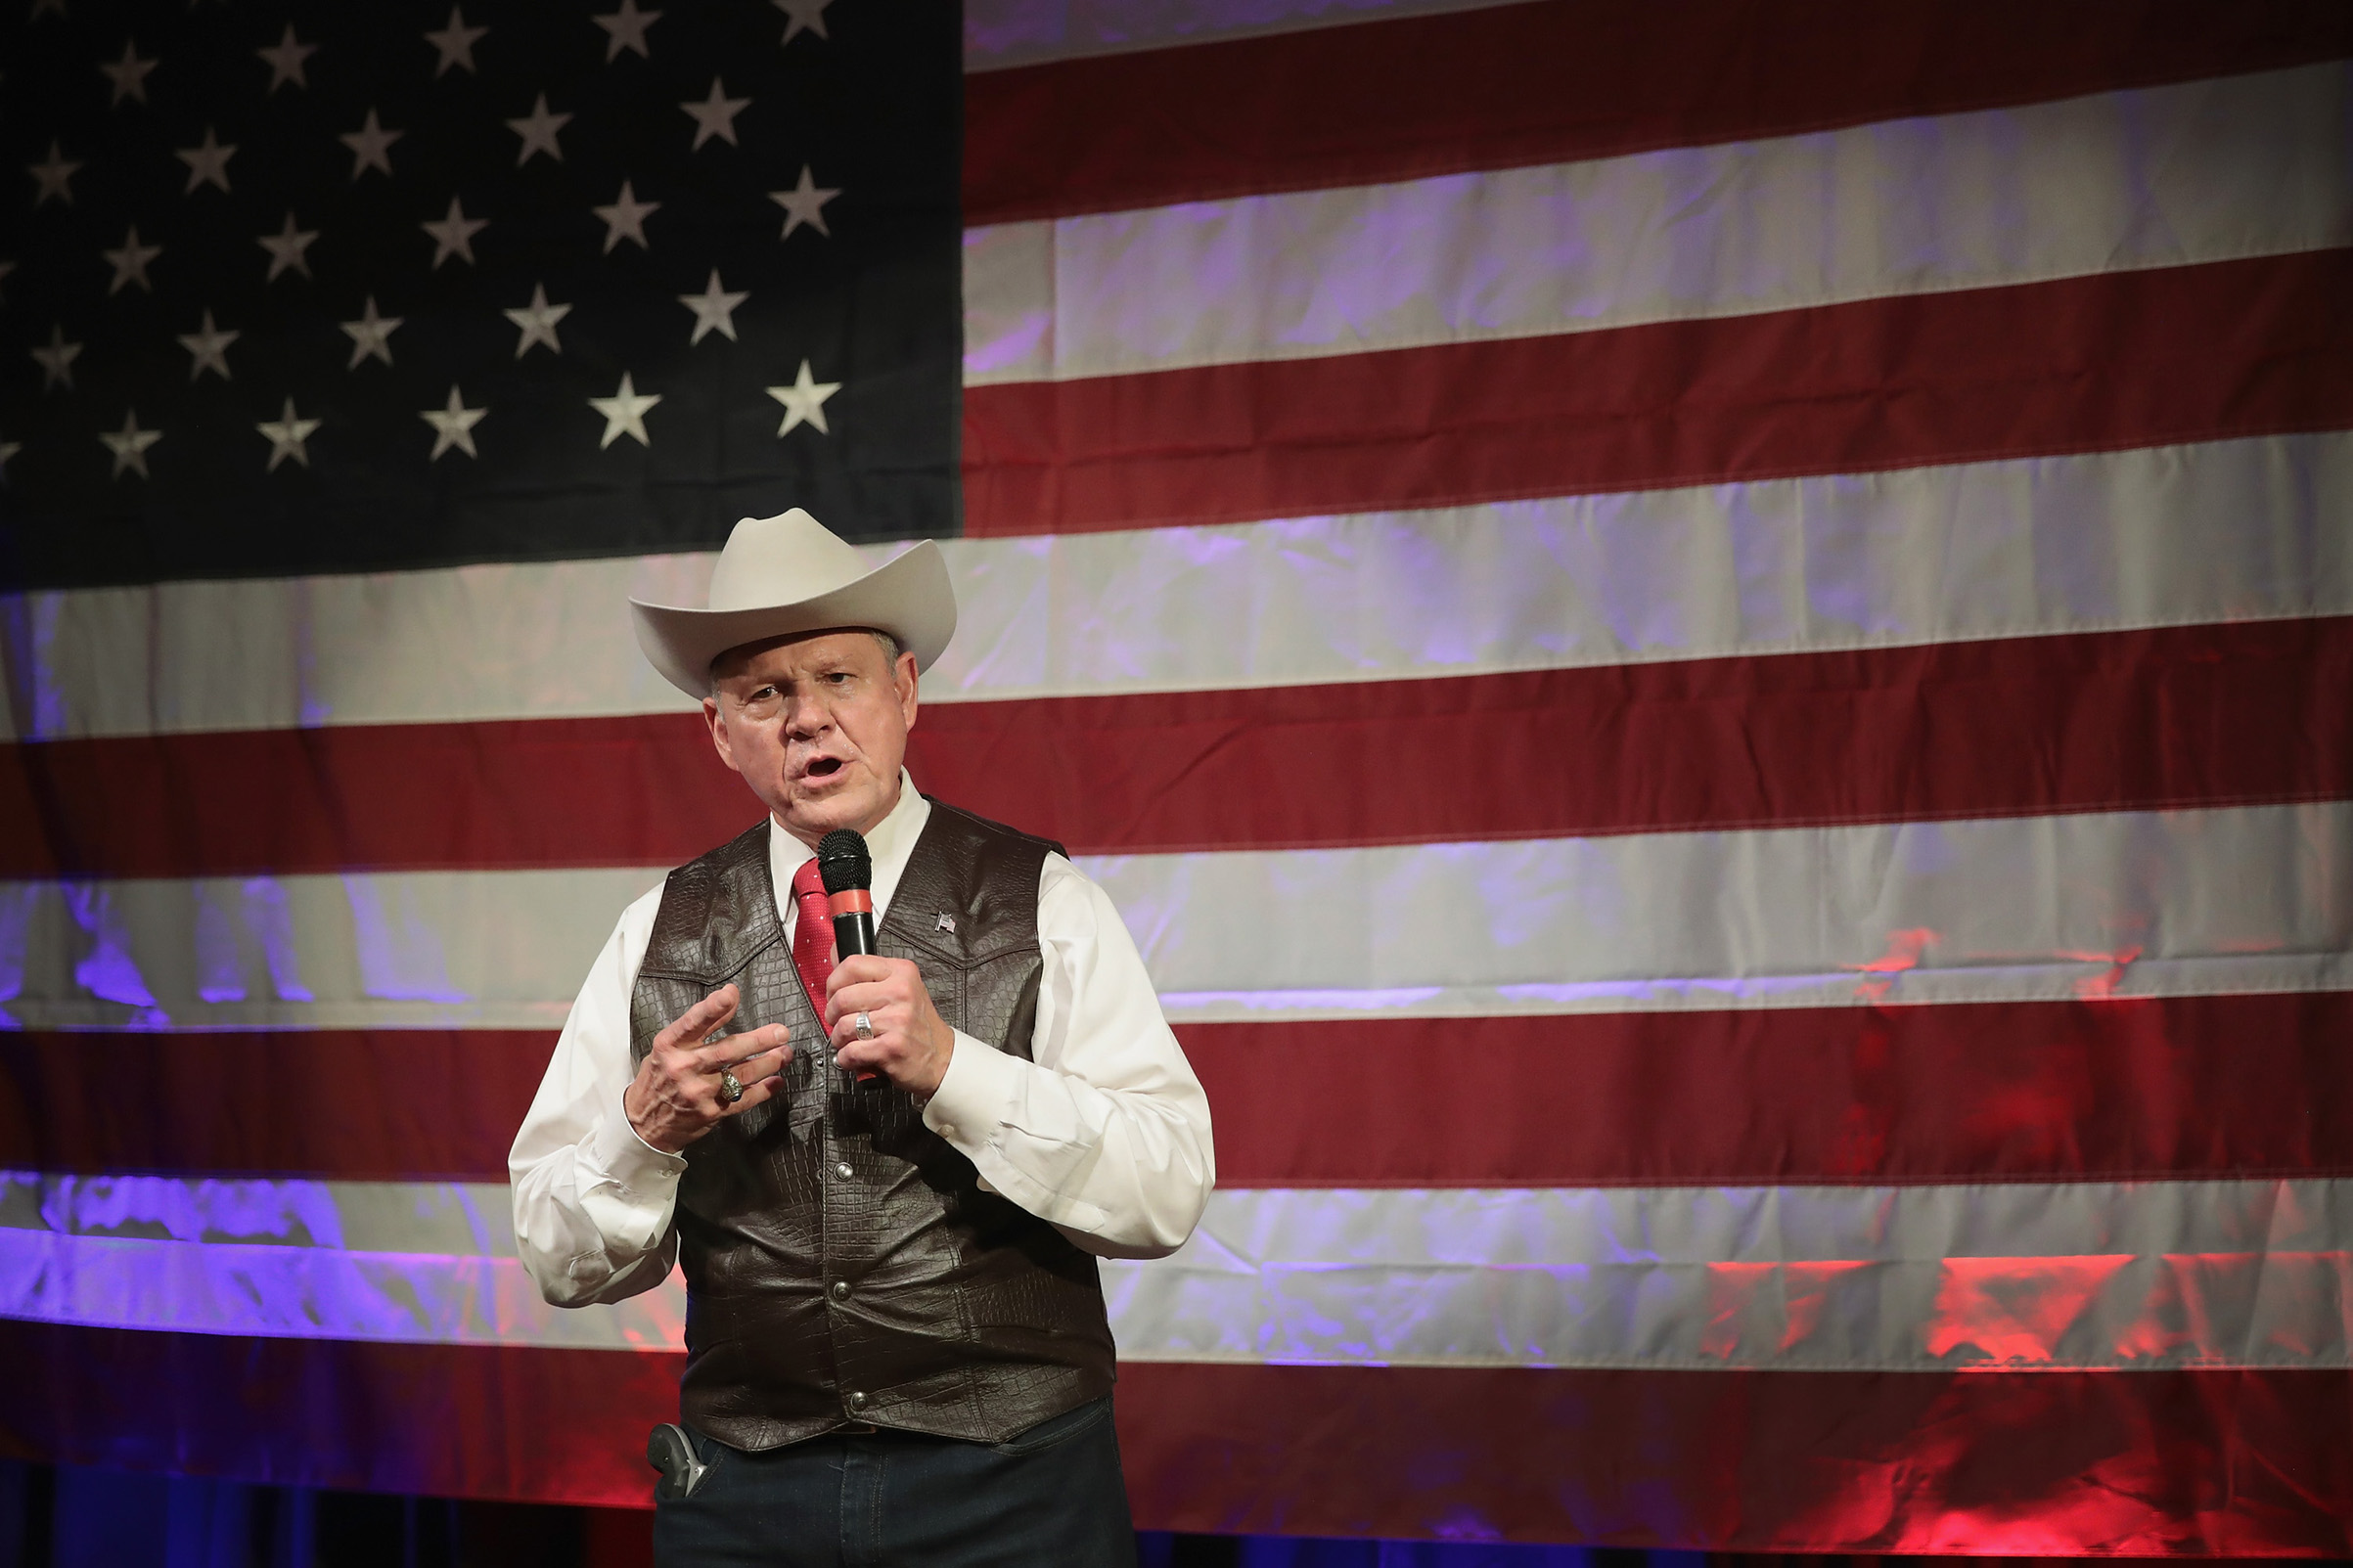 Roy Moore on Sept. 25, 2017. (Getty Images)